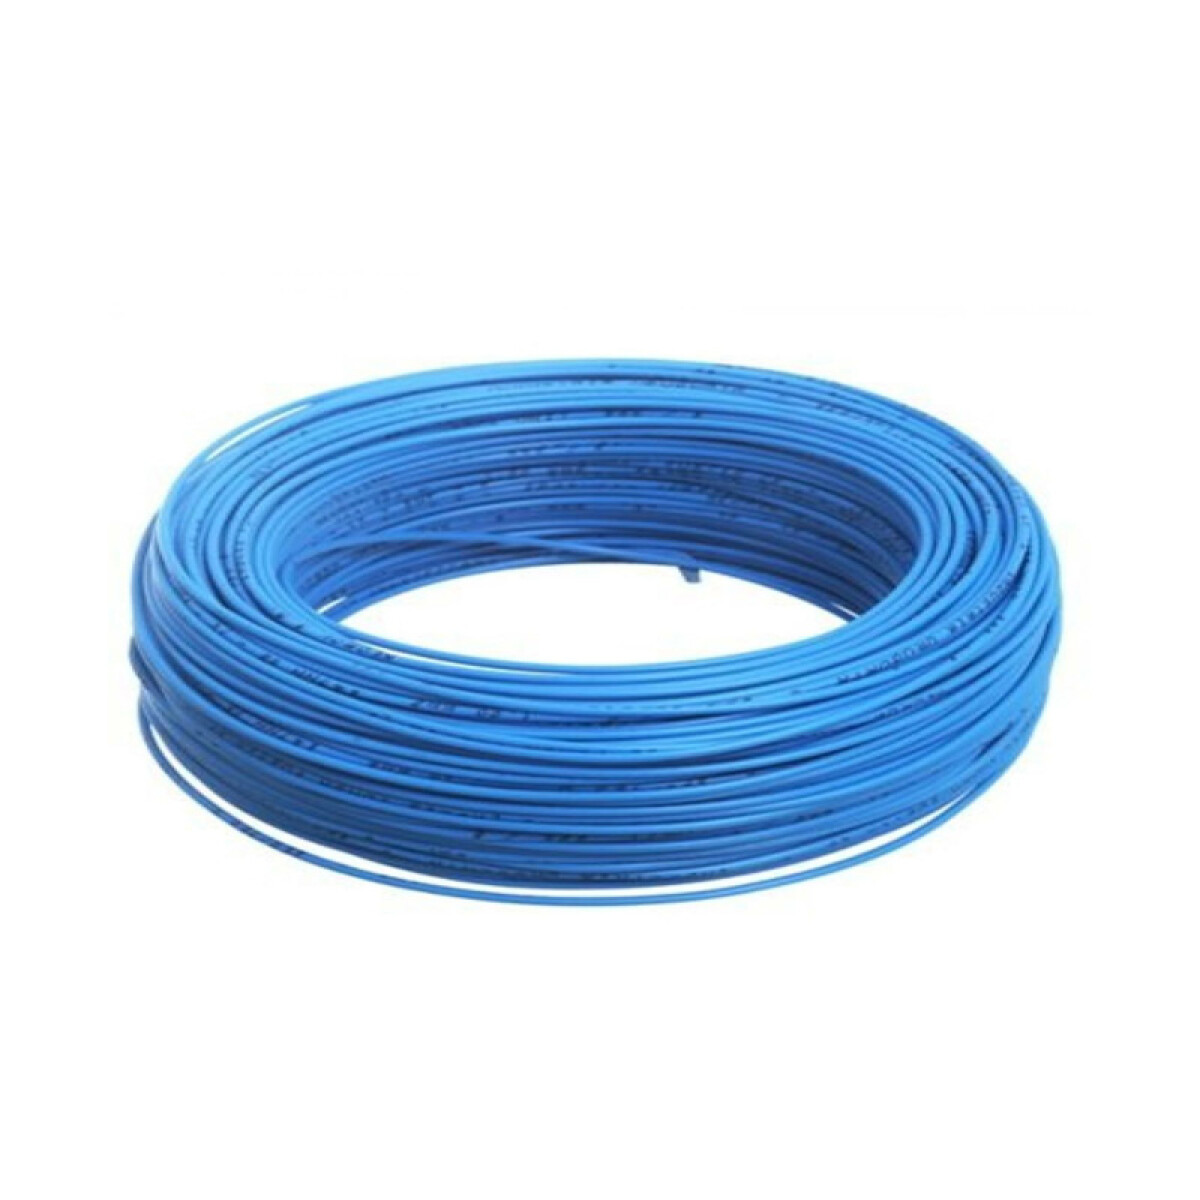 Cable Multifilar Ufex 1mm Azul 